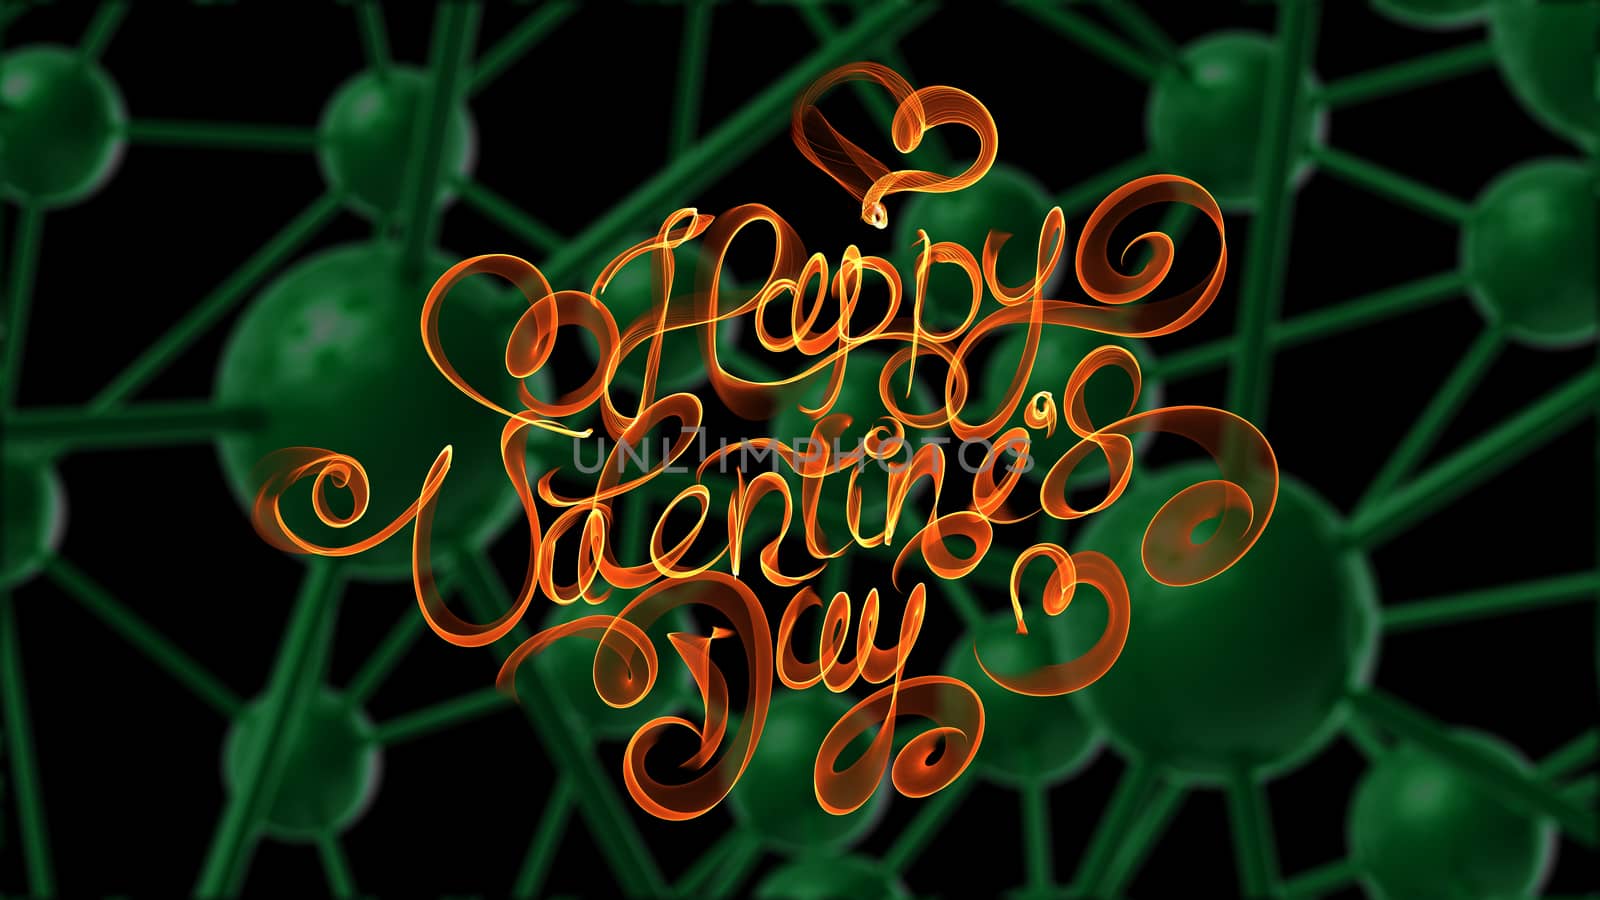 Happy Valentines day vintage lettering written by fire or orange smoke over green molecular background. 3d illustration by skrotov